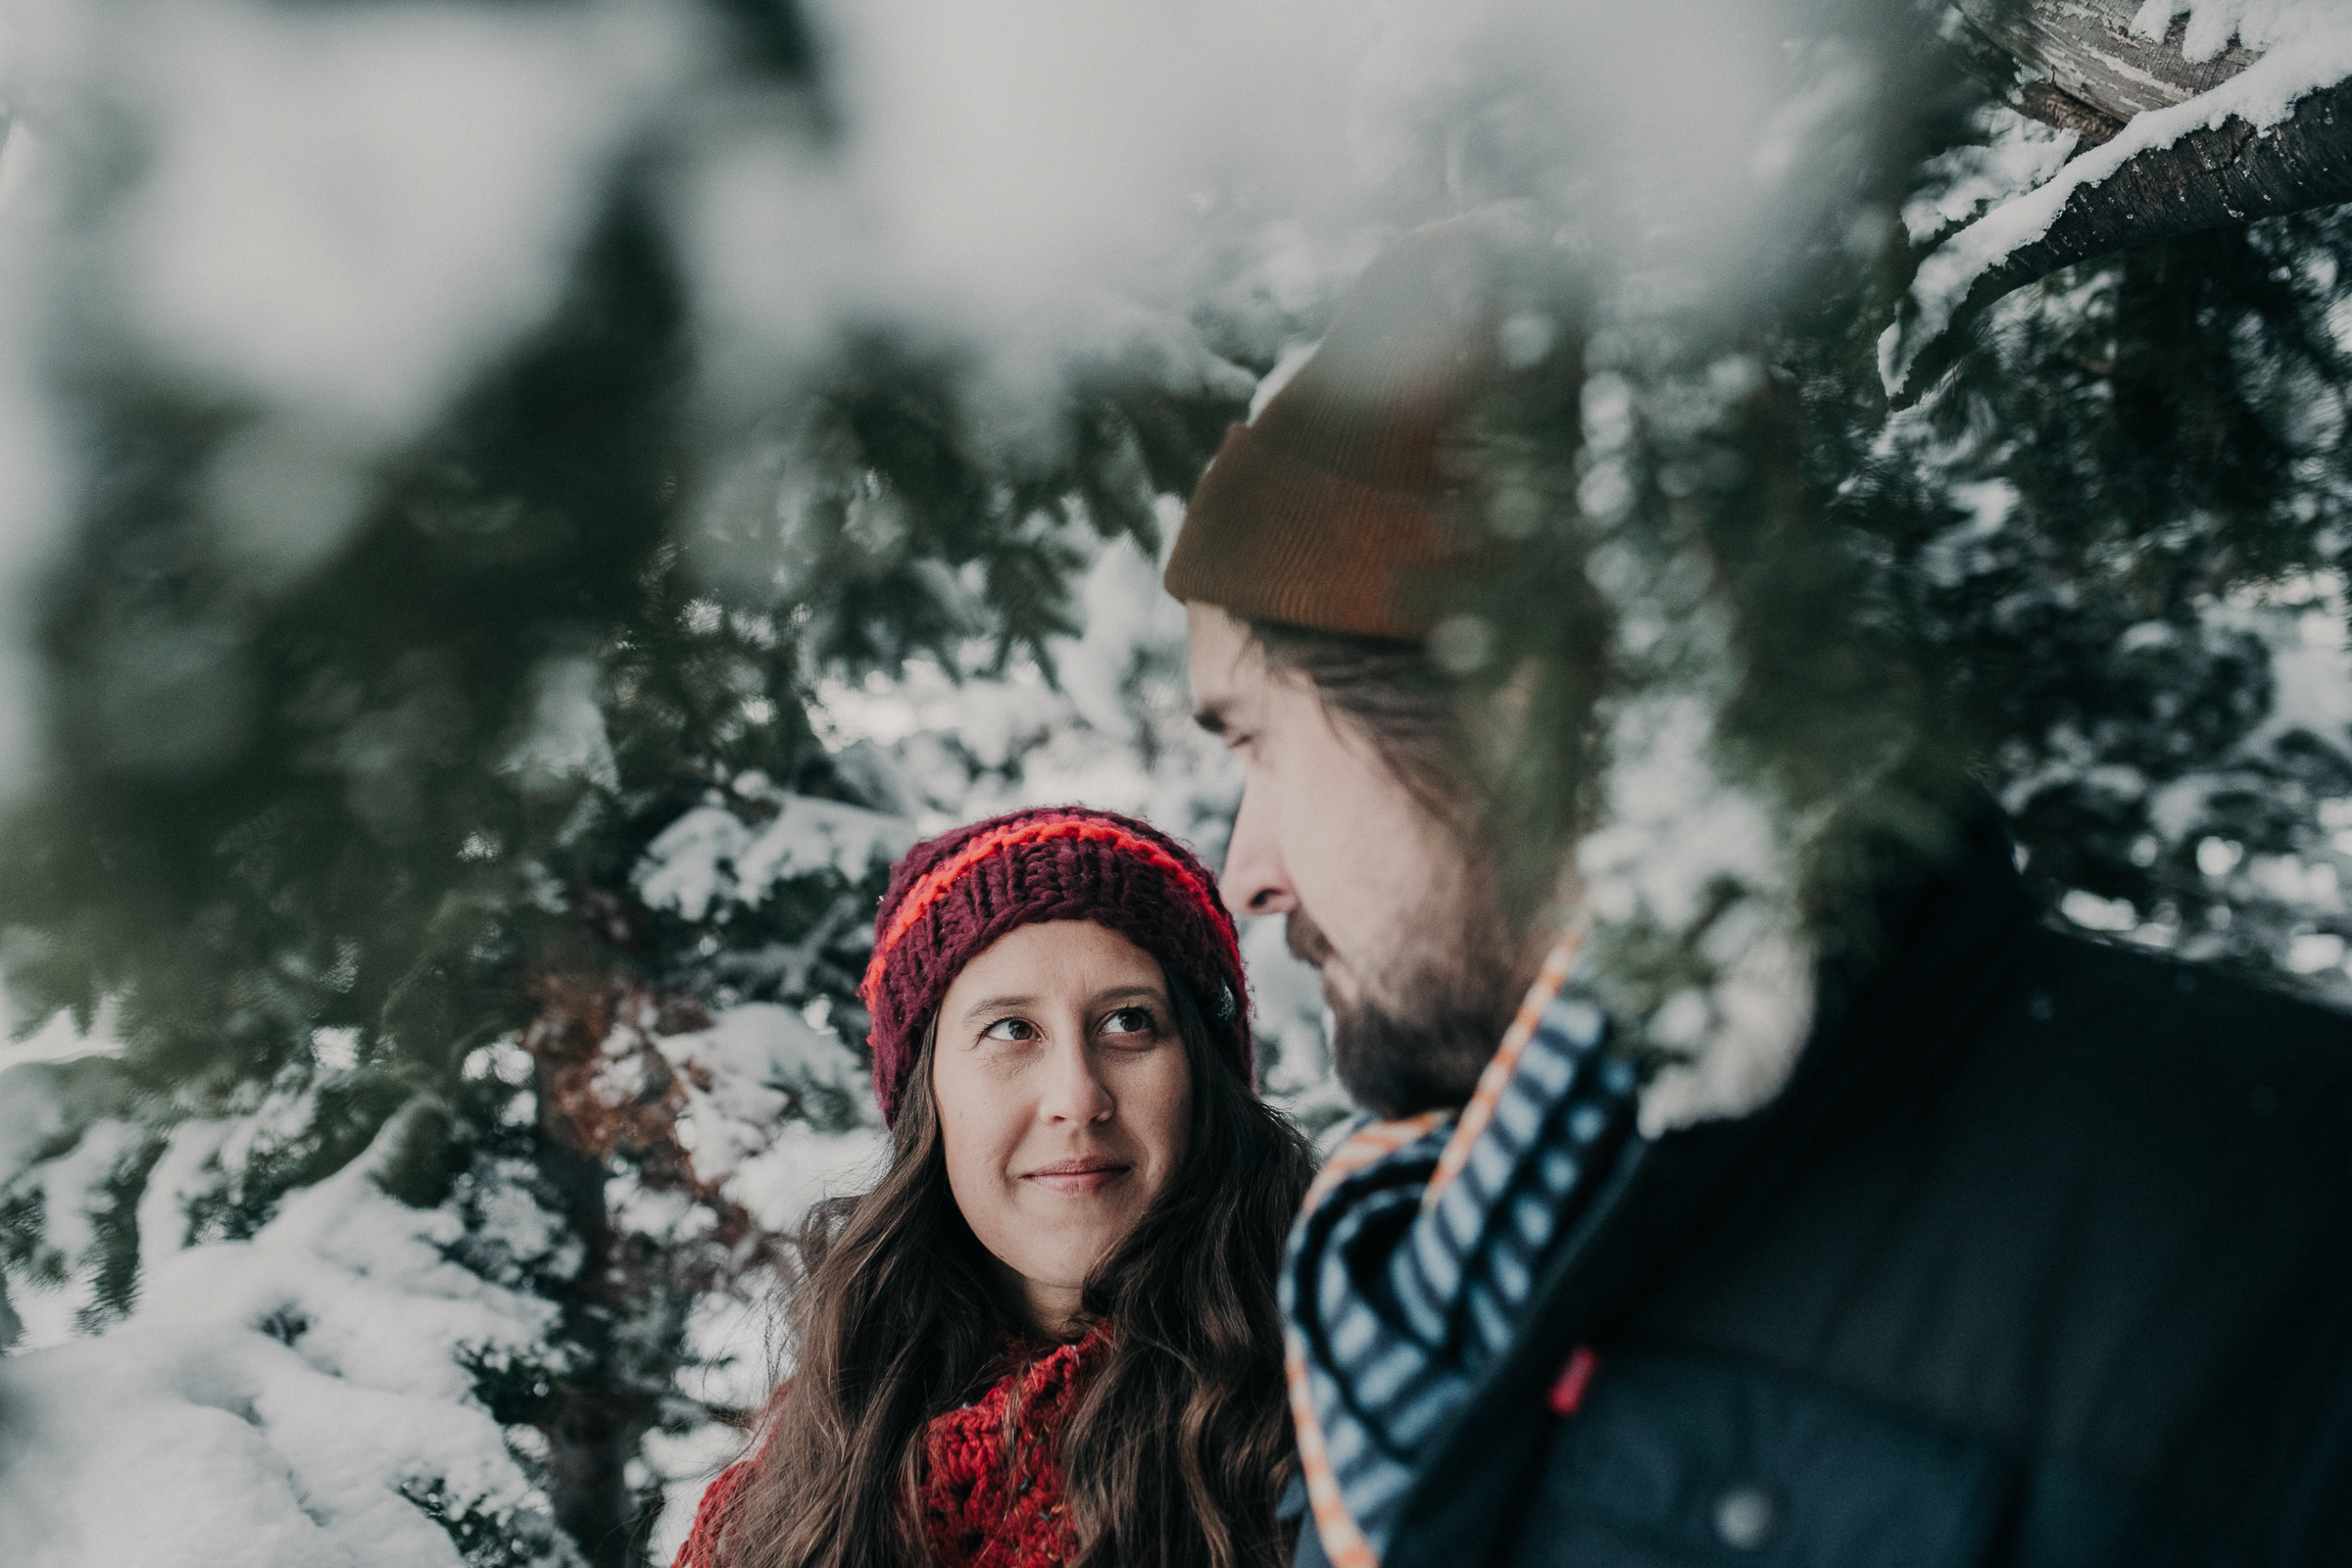 Couple standing together in snowy mountains 